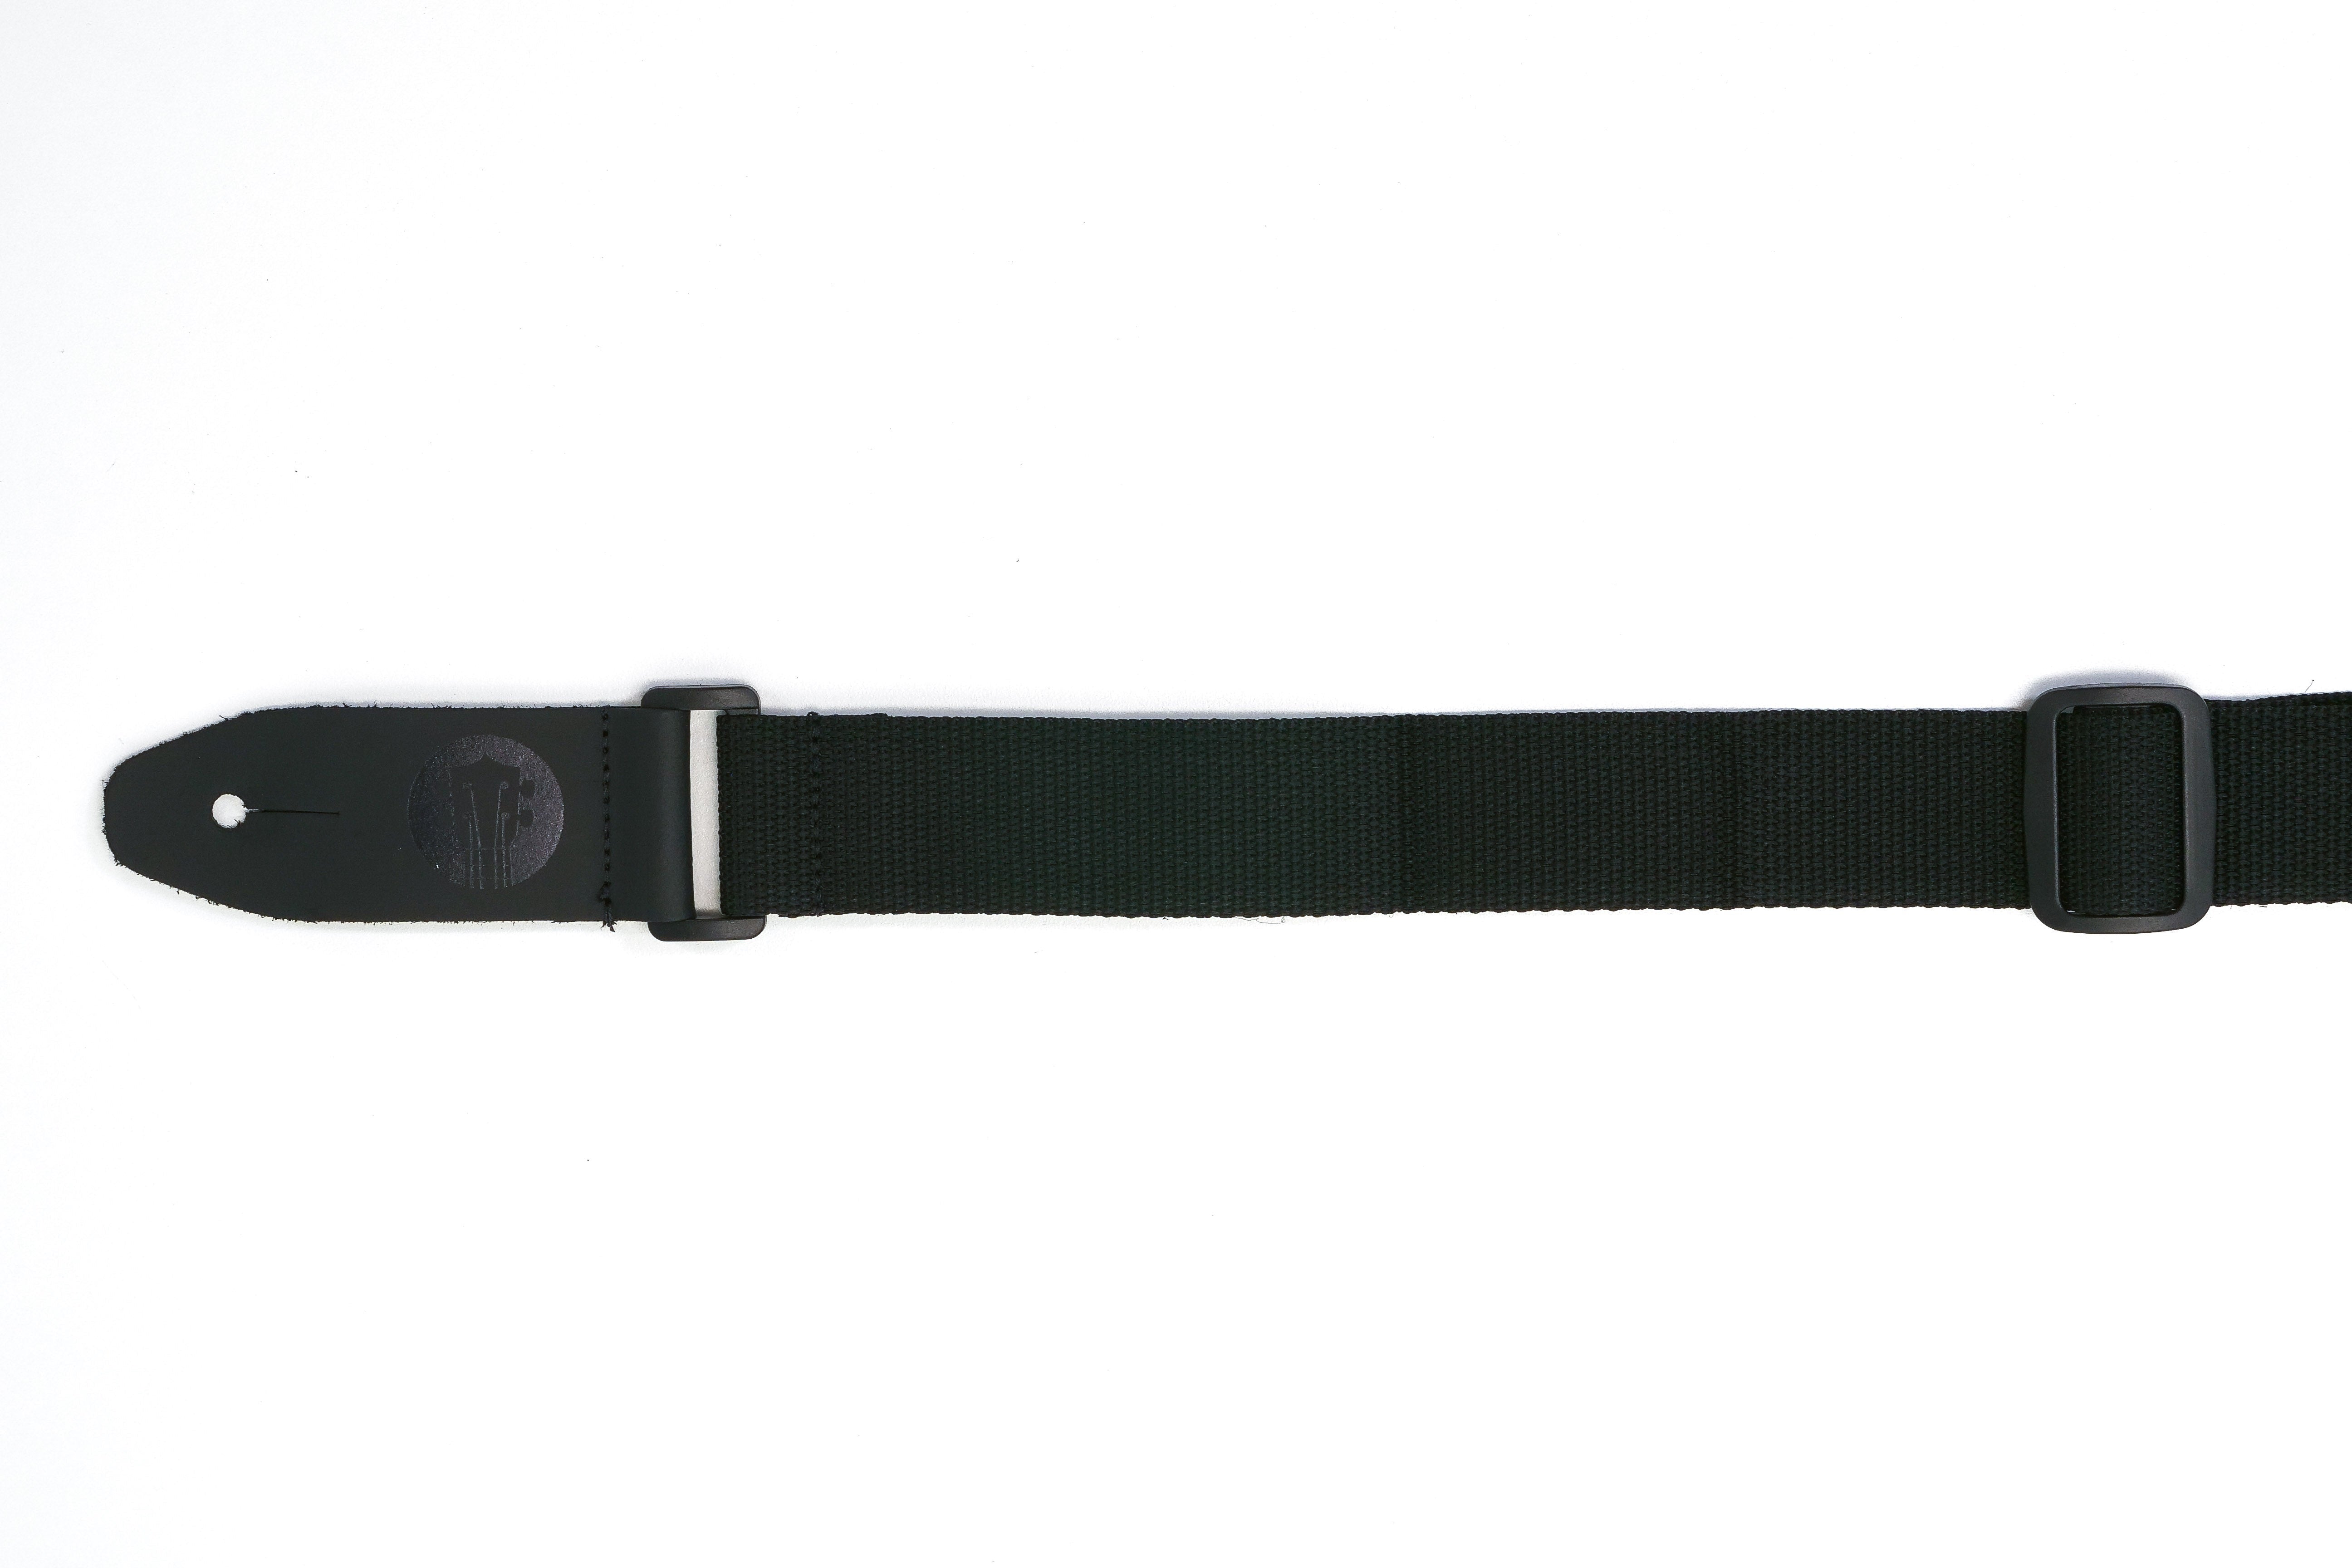 Terry Carter Music Store 1.5 Inch Poly Ukulele and Guitar Strap - BLACK